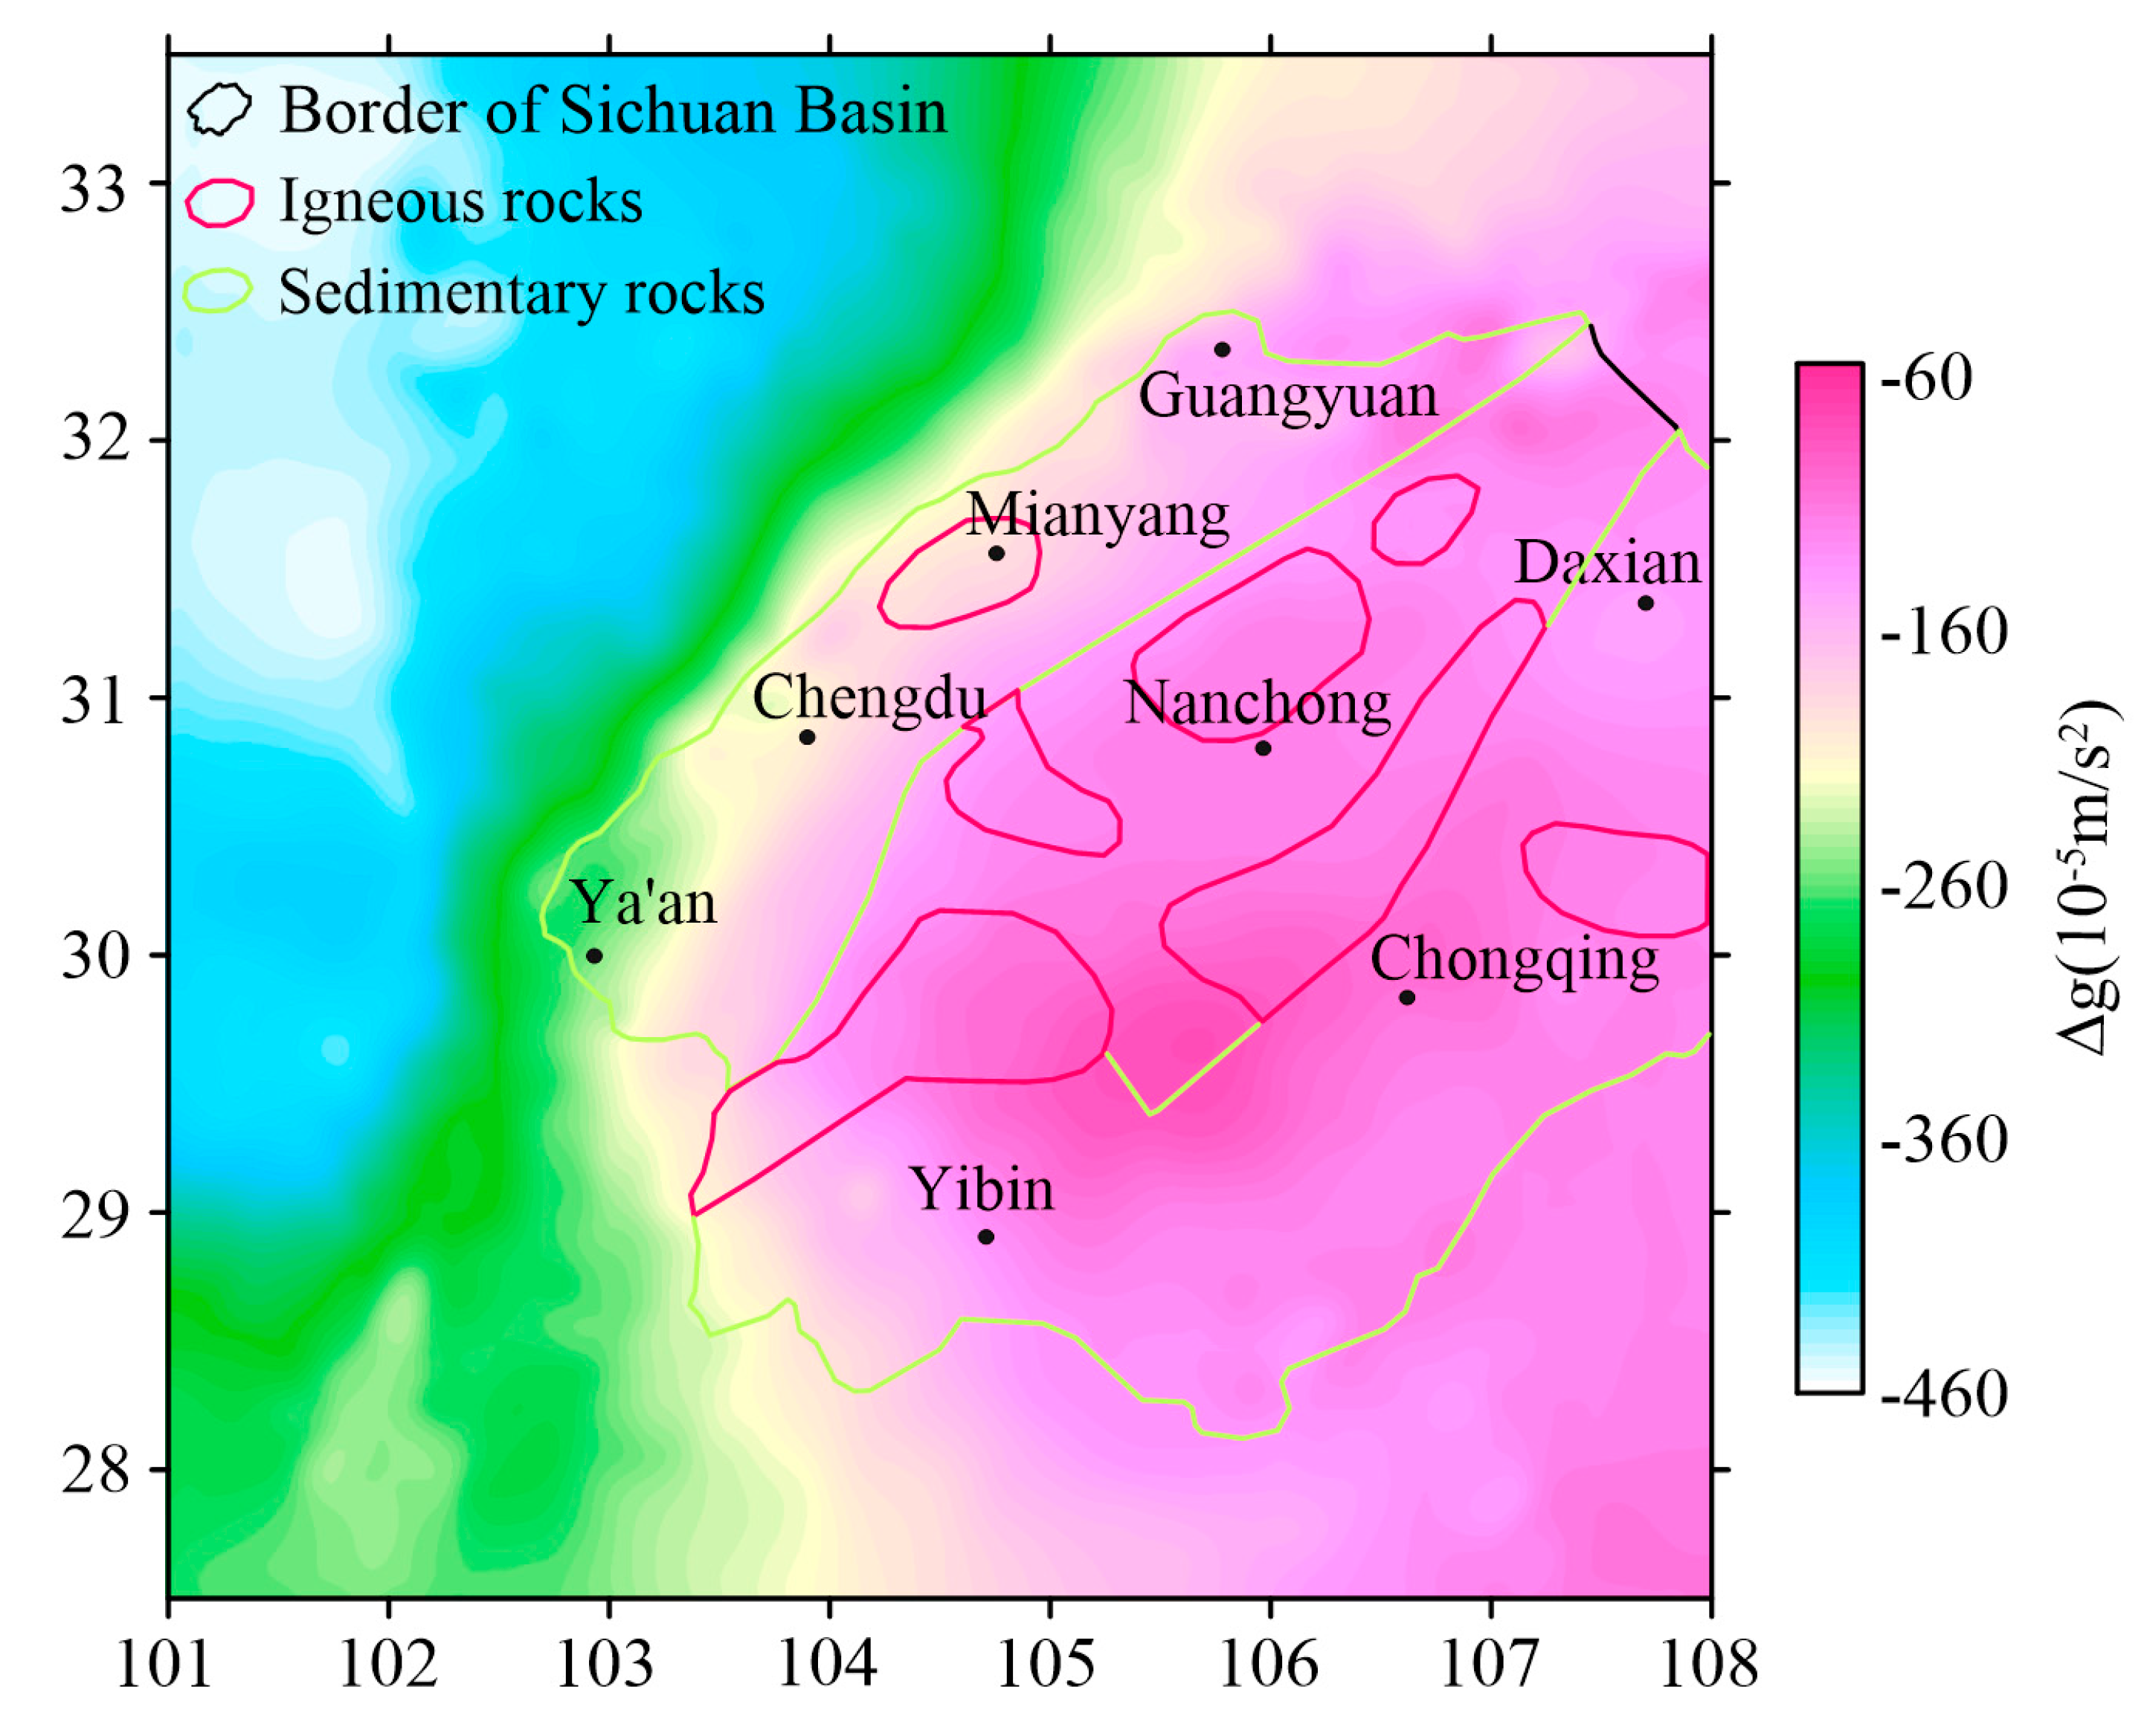 Bouguer Gravity Anomaly contour map as extracted from the regional